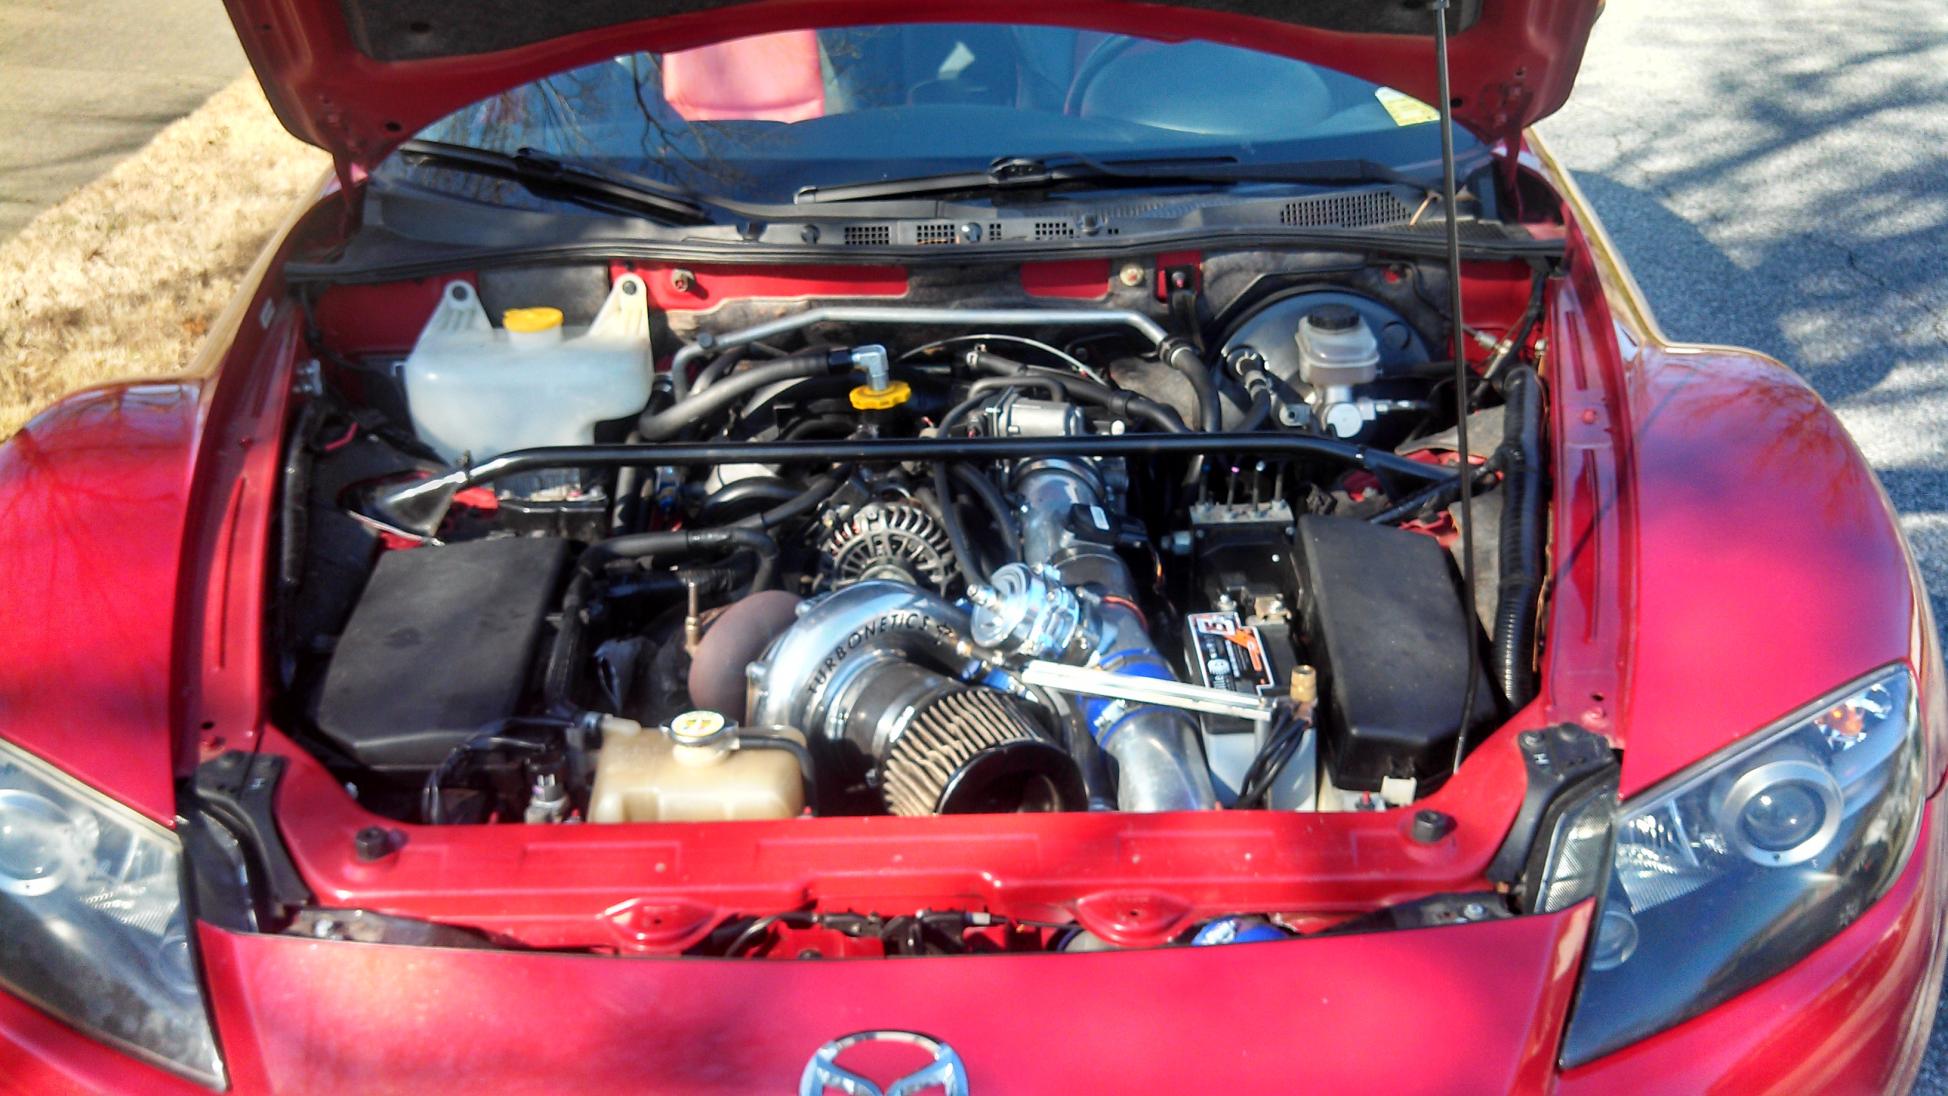  FS  RX8 Top mounted turbo kit with supporting mods - RX8Club.com